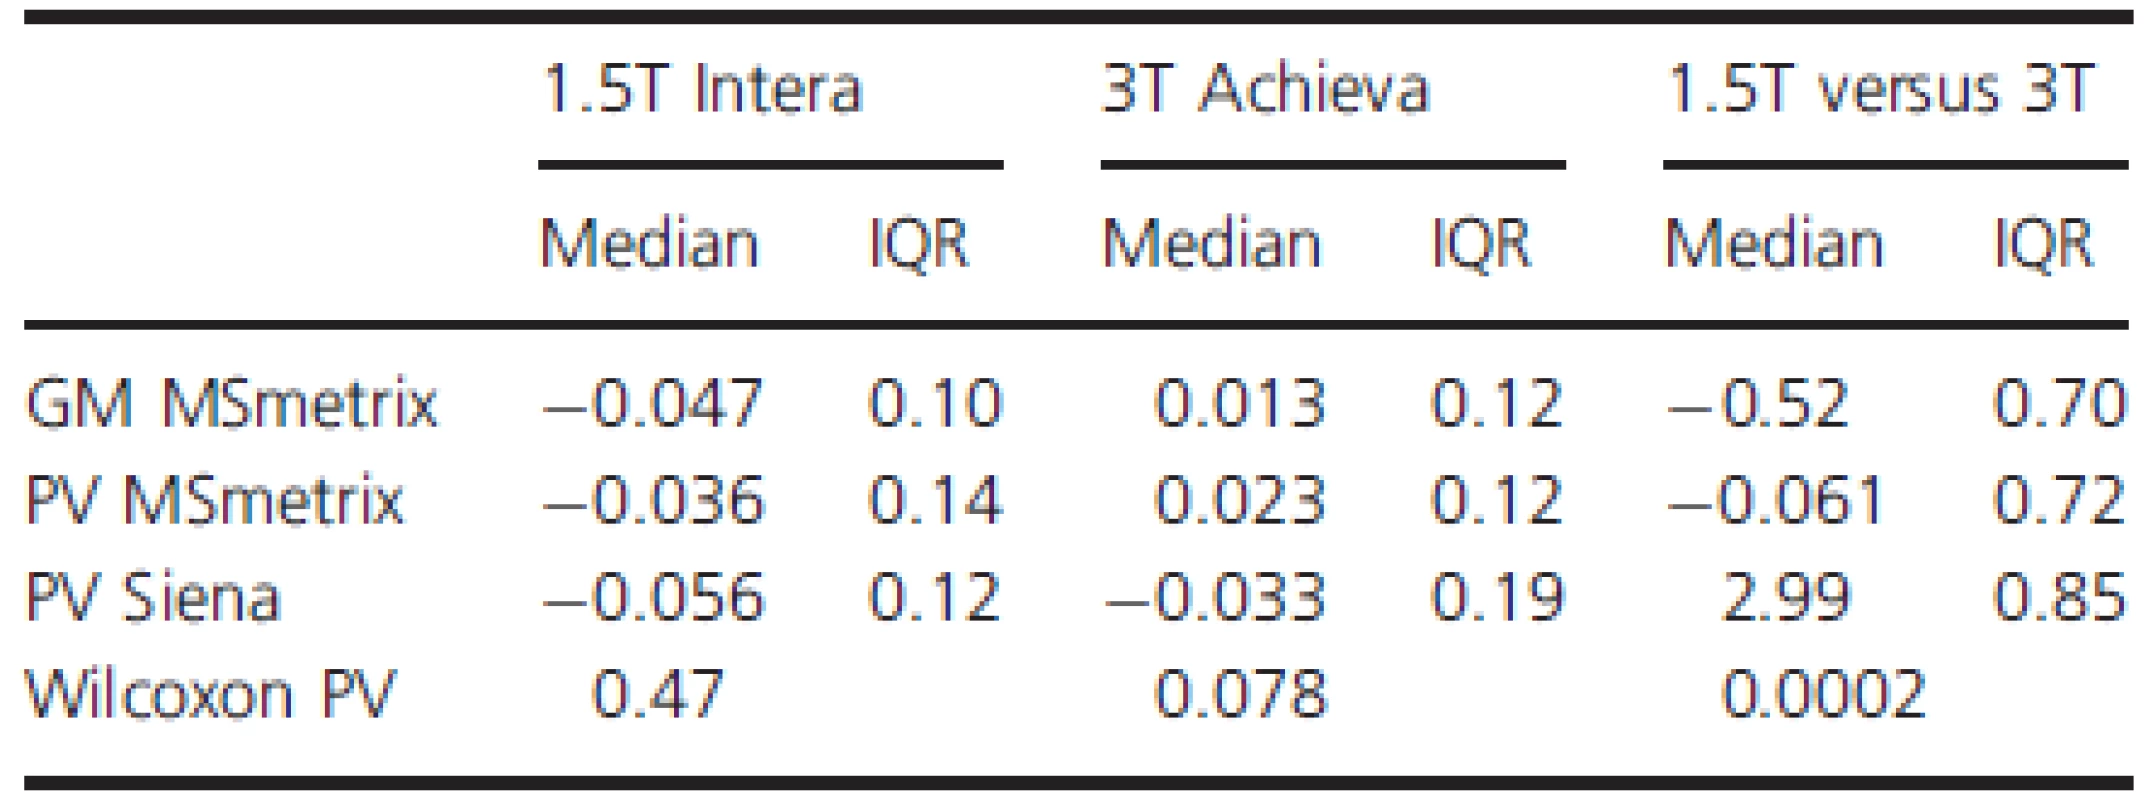 Median and interquartile range (IQR) of the intra and interscanner PBVC measures for PV and GM (in %).